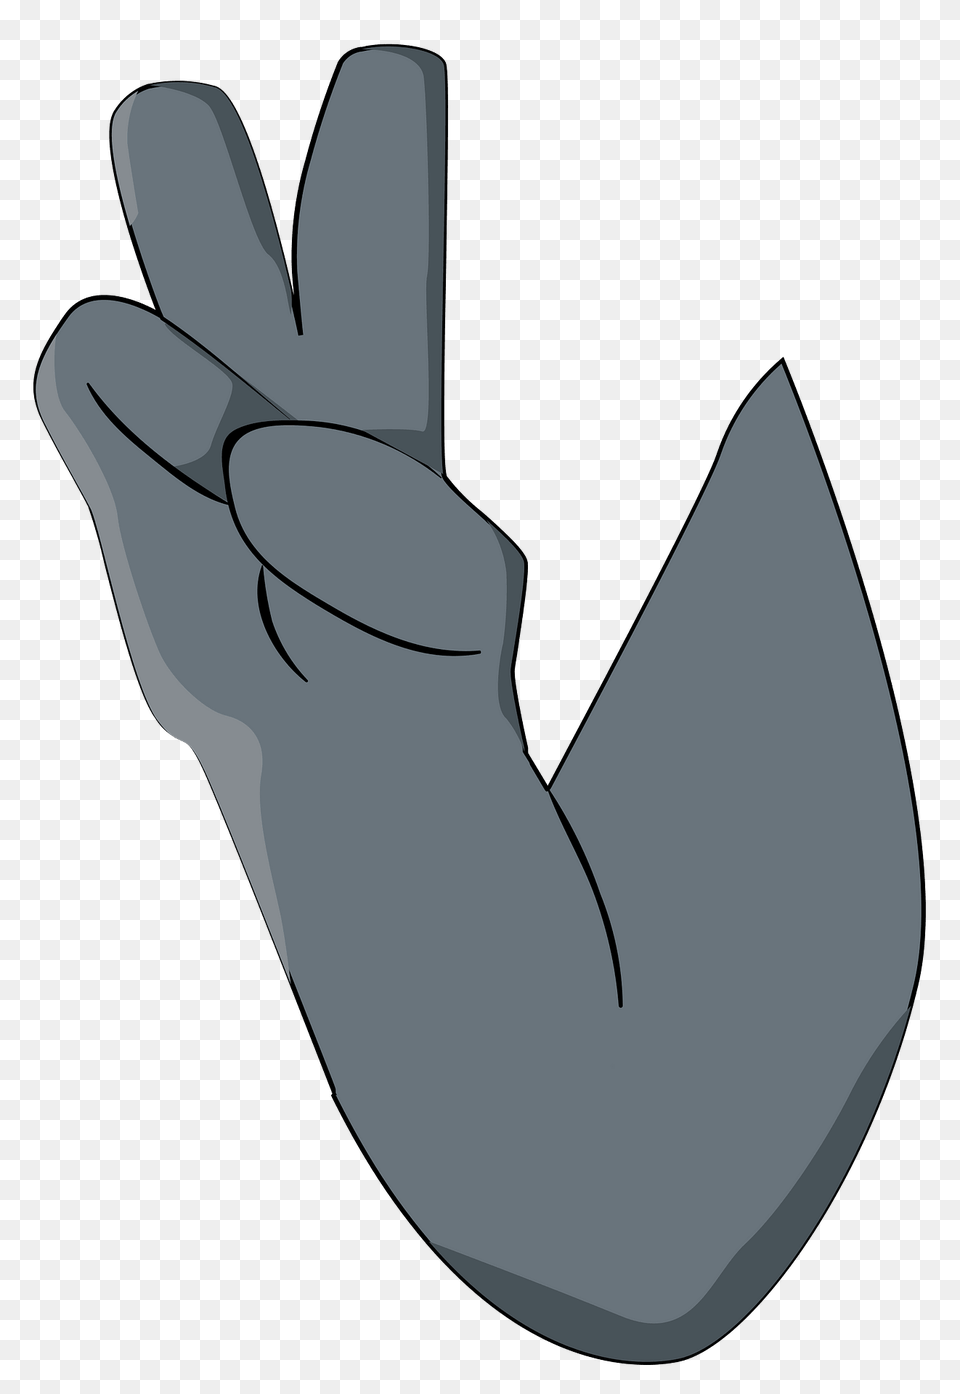 Wolf Hand In Peaceful Gesture Clipart, Clothing, Glove, Bow, Weapon Free Transparent Png